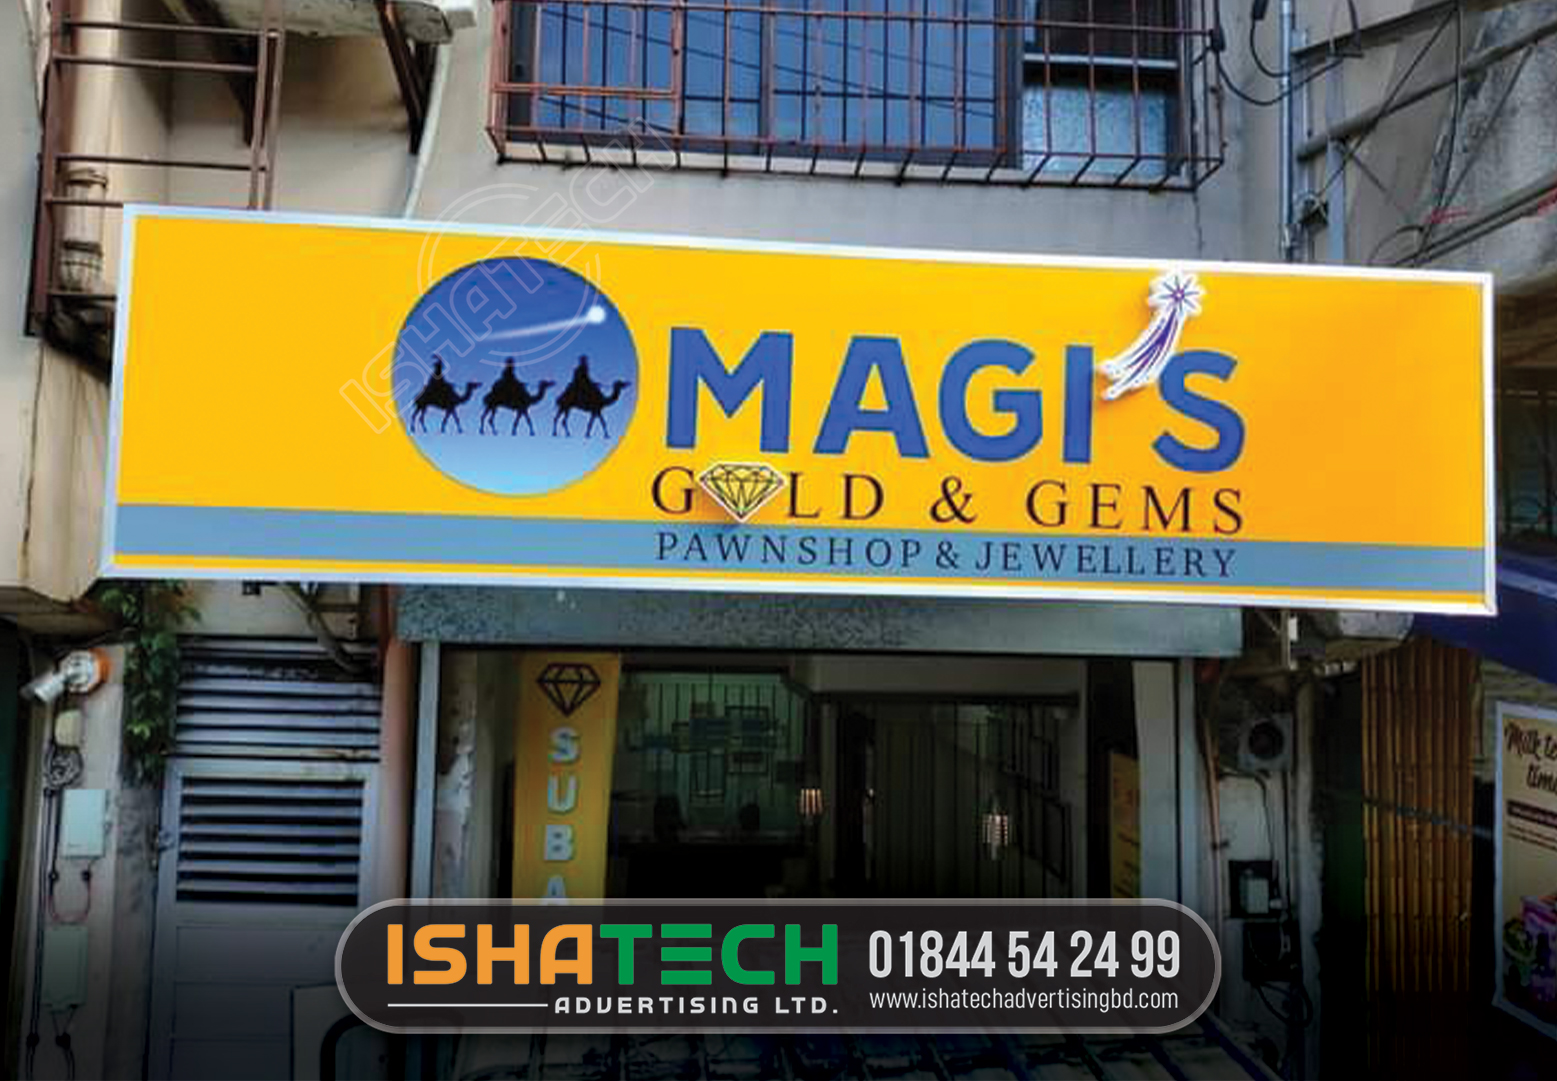 MAGI'S PROFILE LIGHTING LIGNBOARD MAKING BY ISHATECH ADVERTISING LTD, LEADING SIGNBOARD MAKING COMPANY IN DHAKA BANGLADESWH, BEST LED SIGNS BD, BILLBOARD BD, SIGNBOARD BD, NEON SIGNS BD